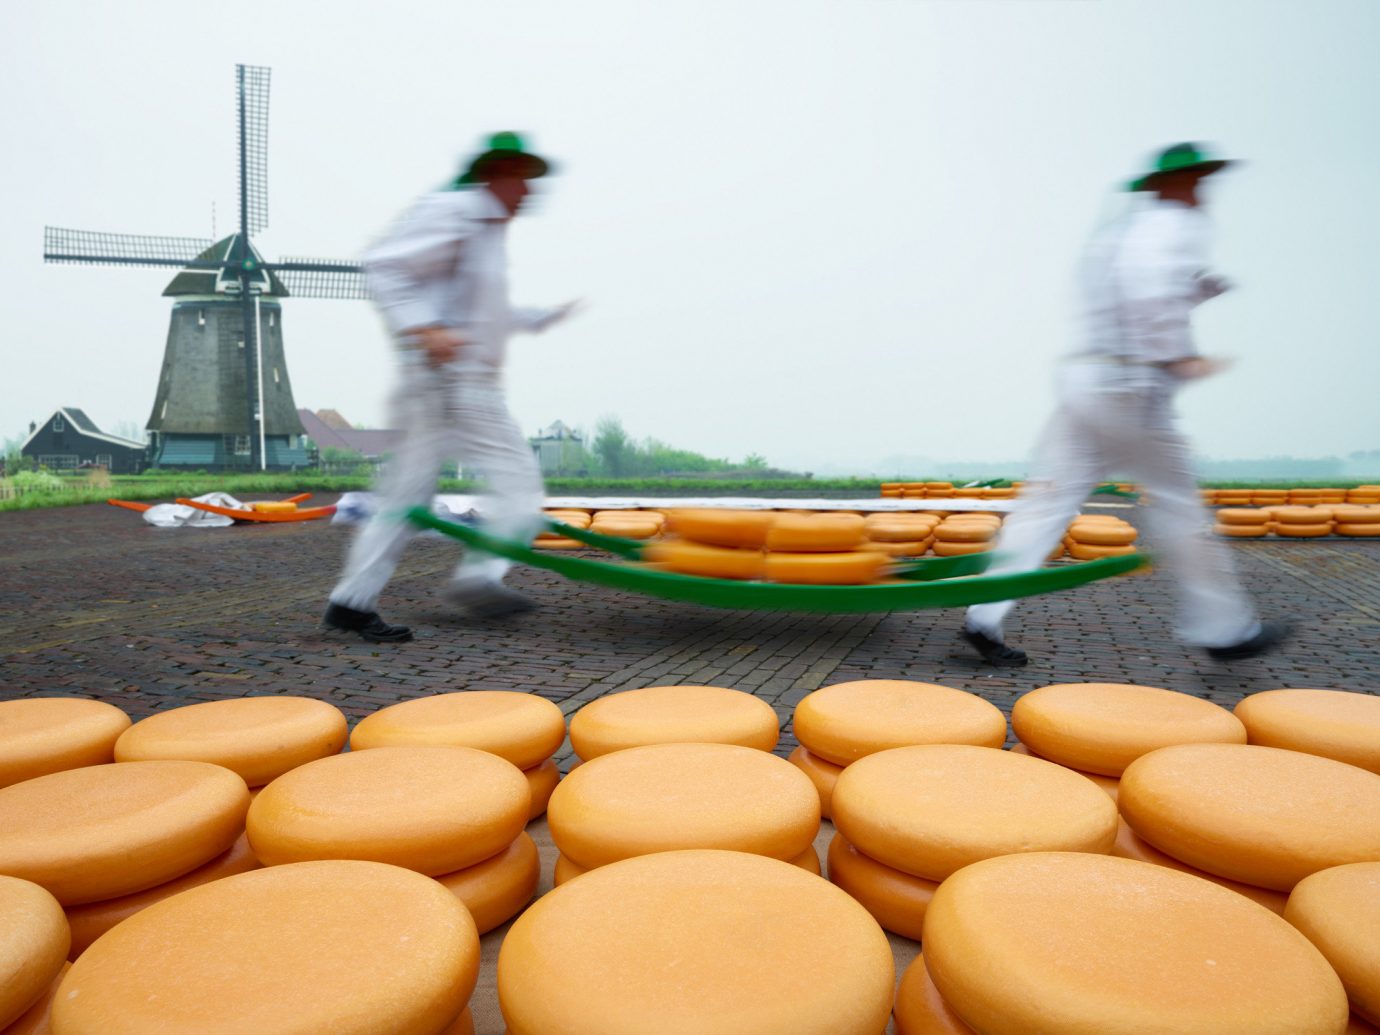 Gouda cheese being made in Gouda Netherlands